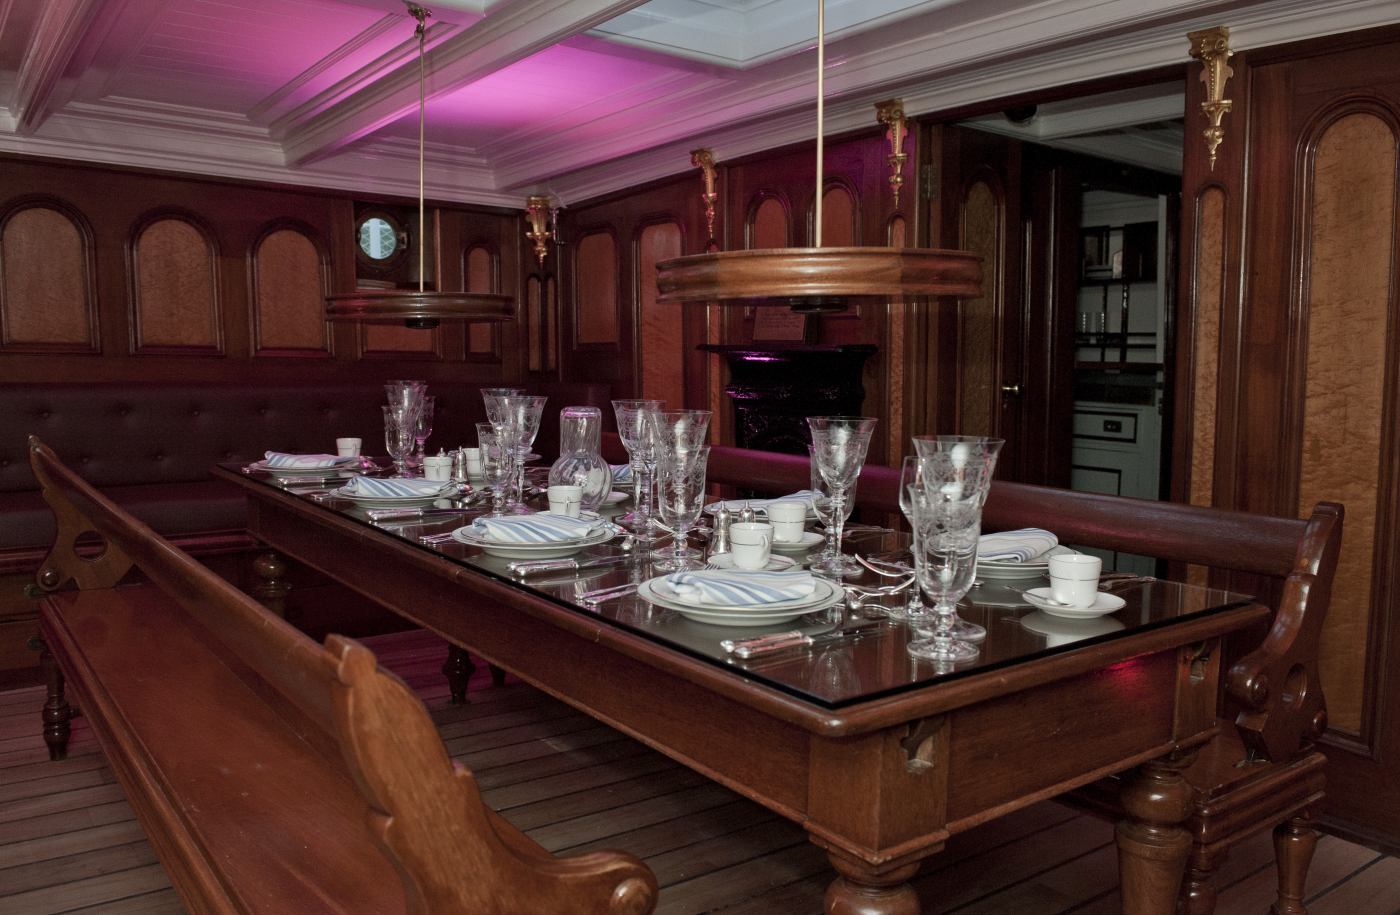 An image showing 'Dinner in Master's Saloon '